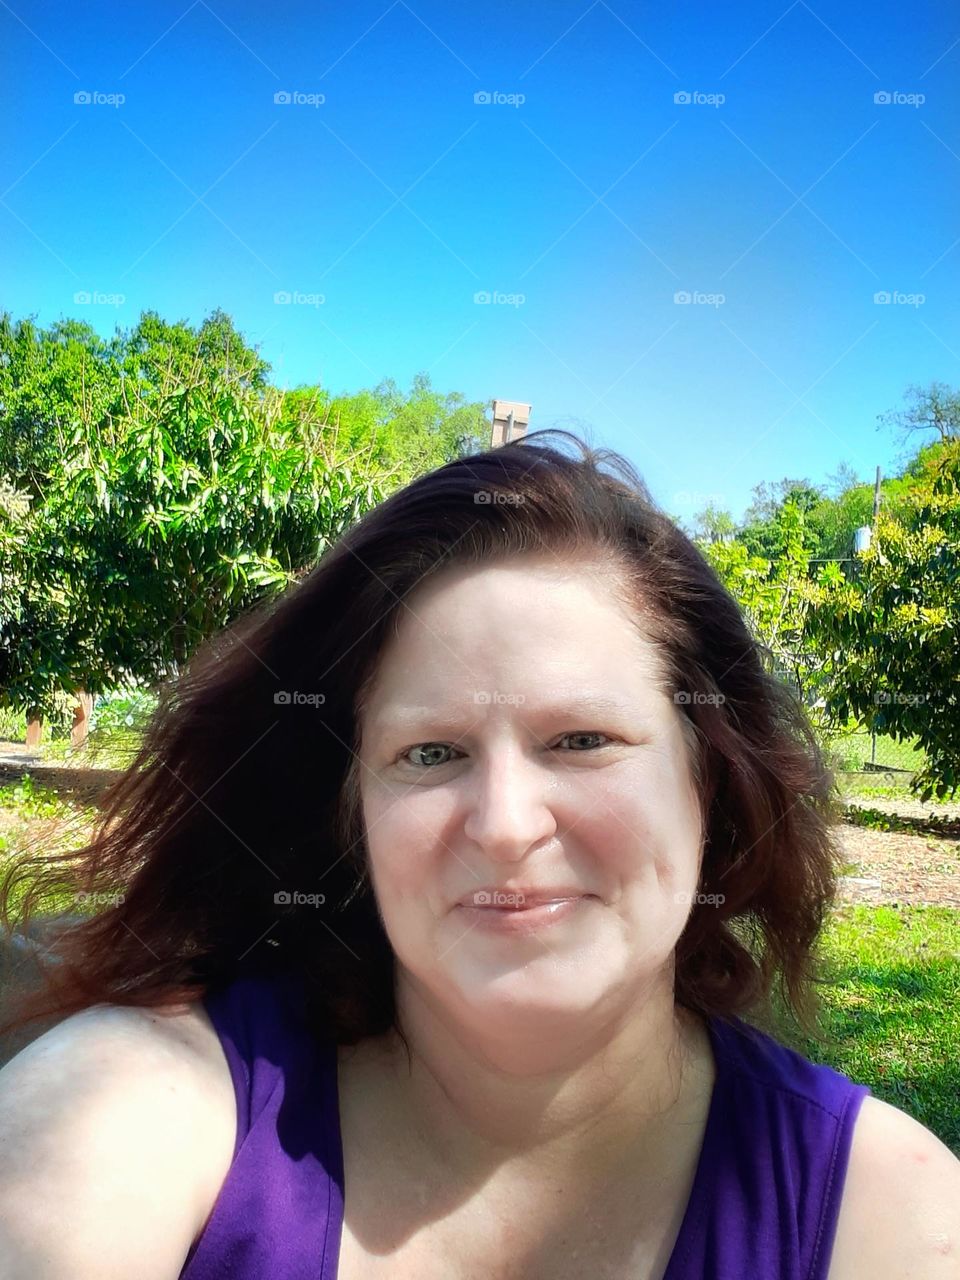 A selfie I took of me at Greenwood Urban Wetland in Orlando, Florida. It was a beautiful and windy day.